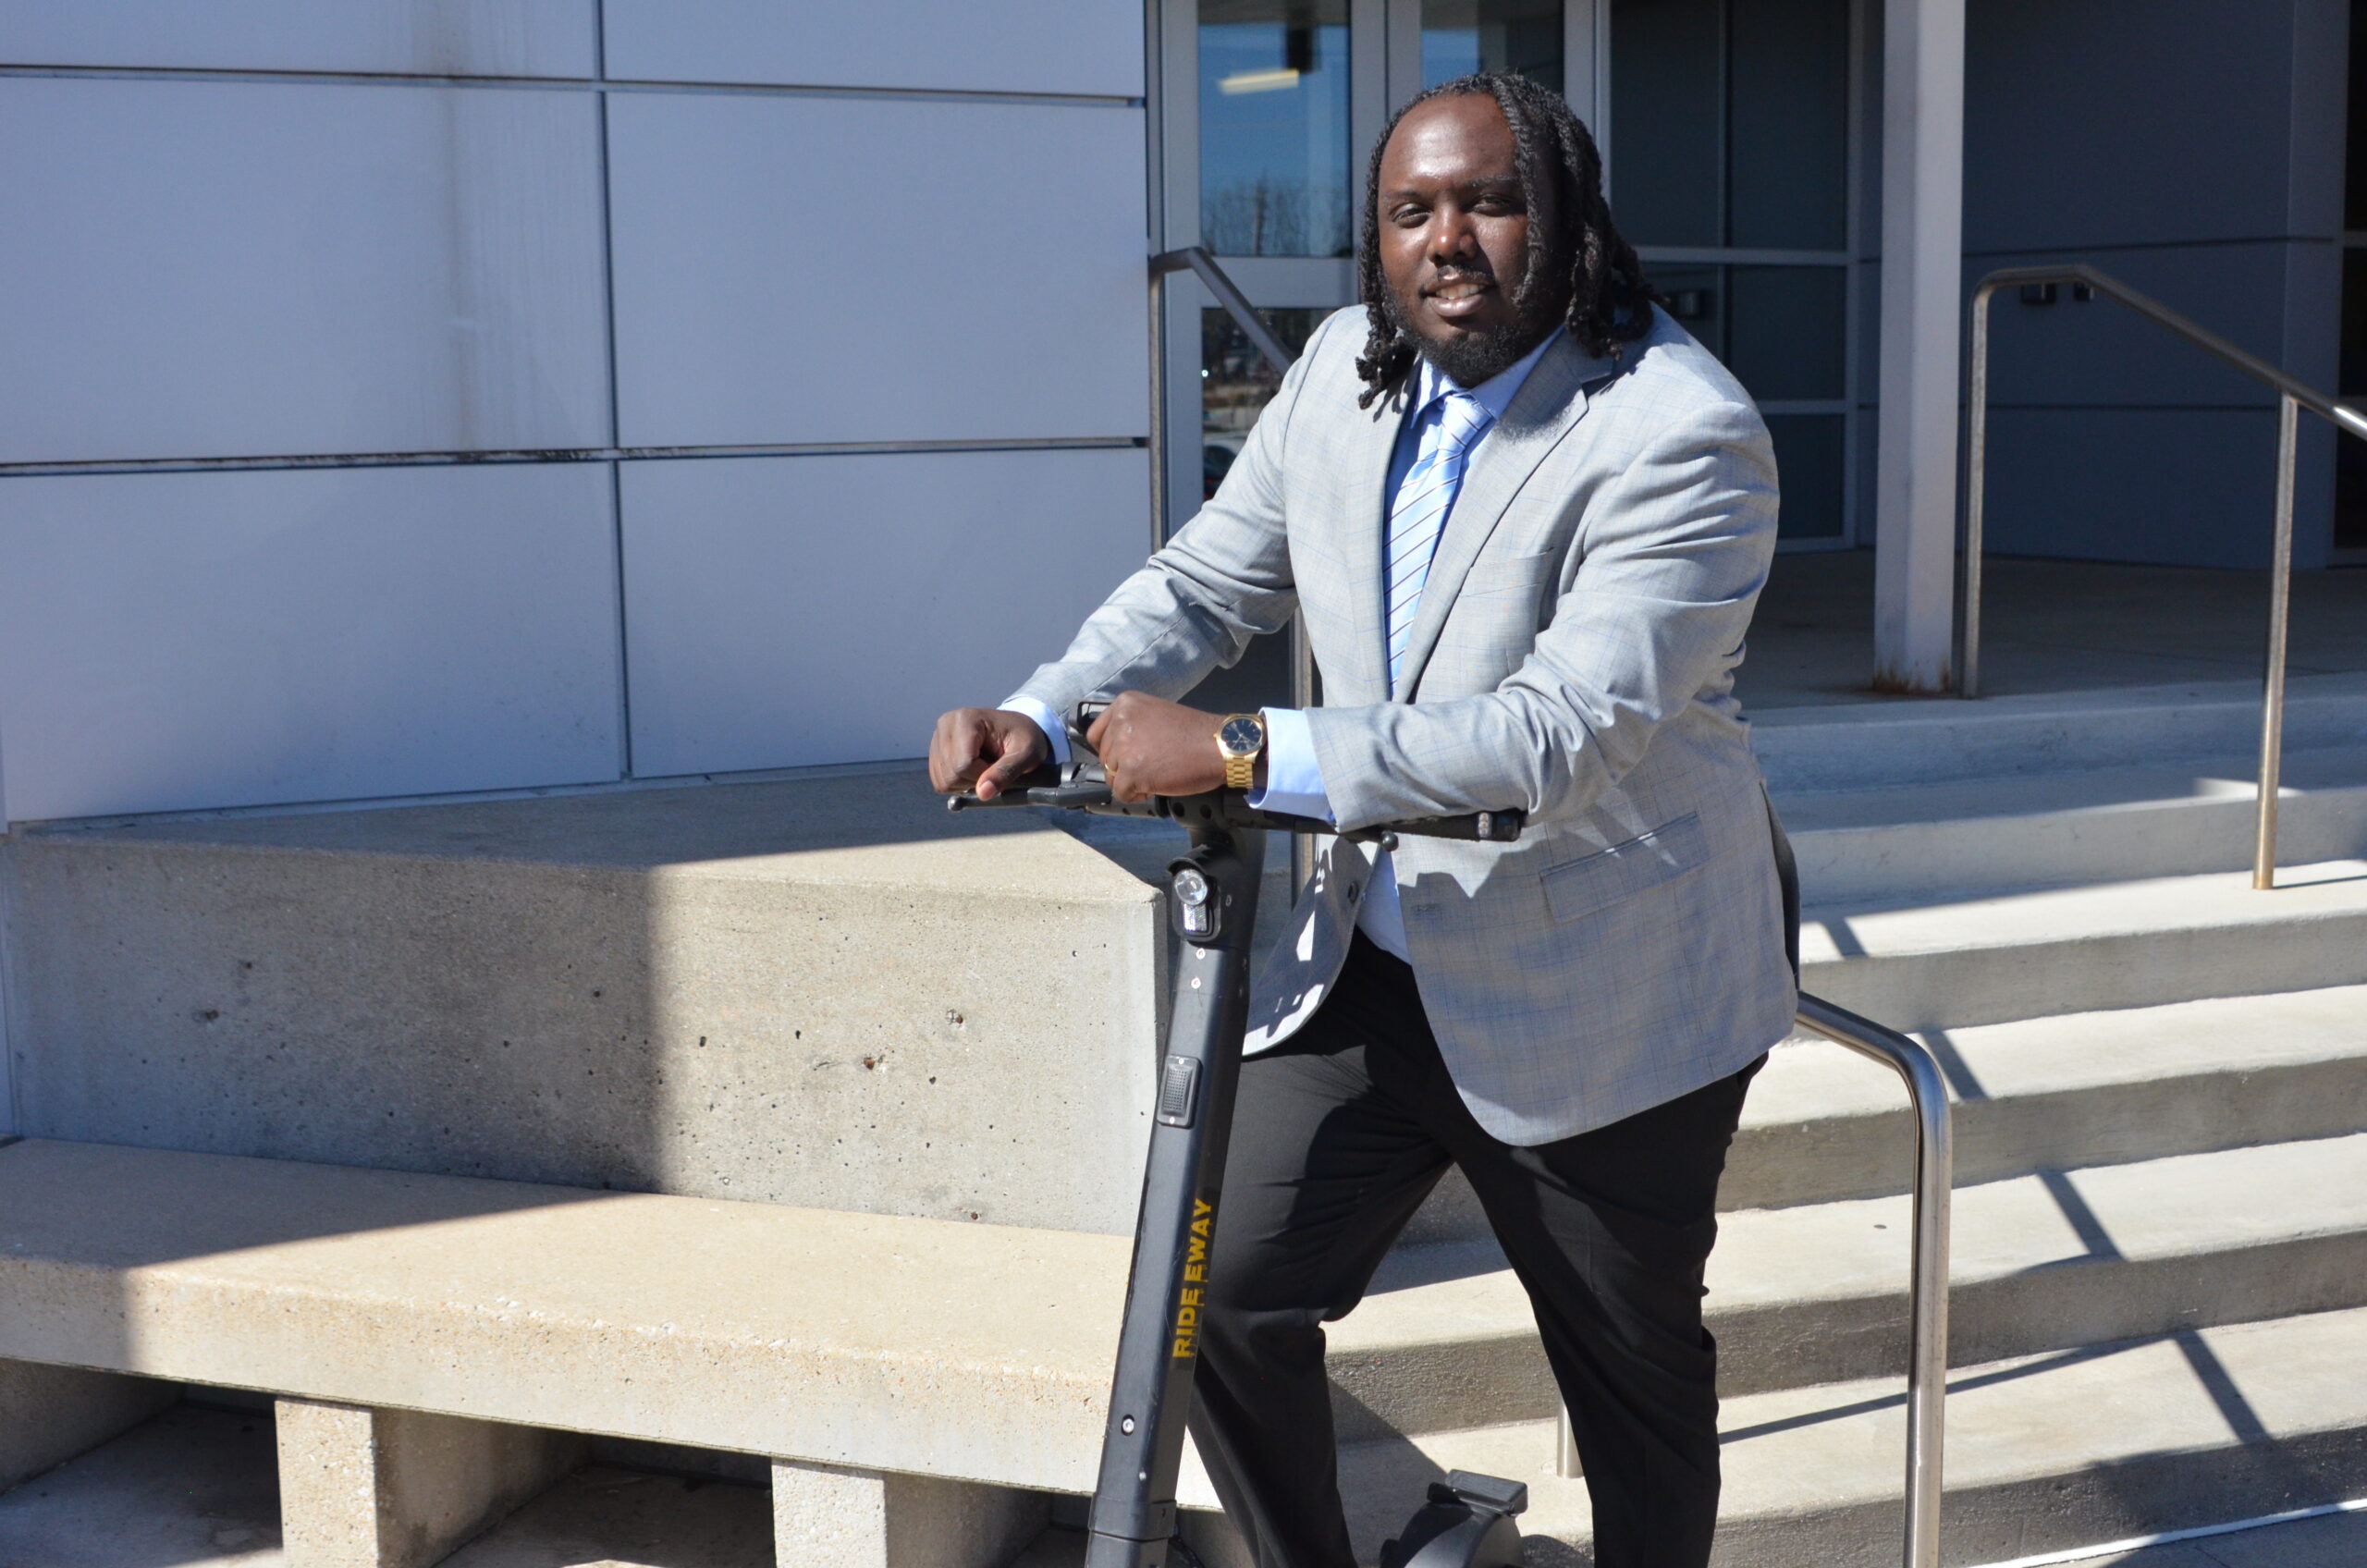 Marquez Williams stands with his eway scooter at efactory.